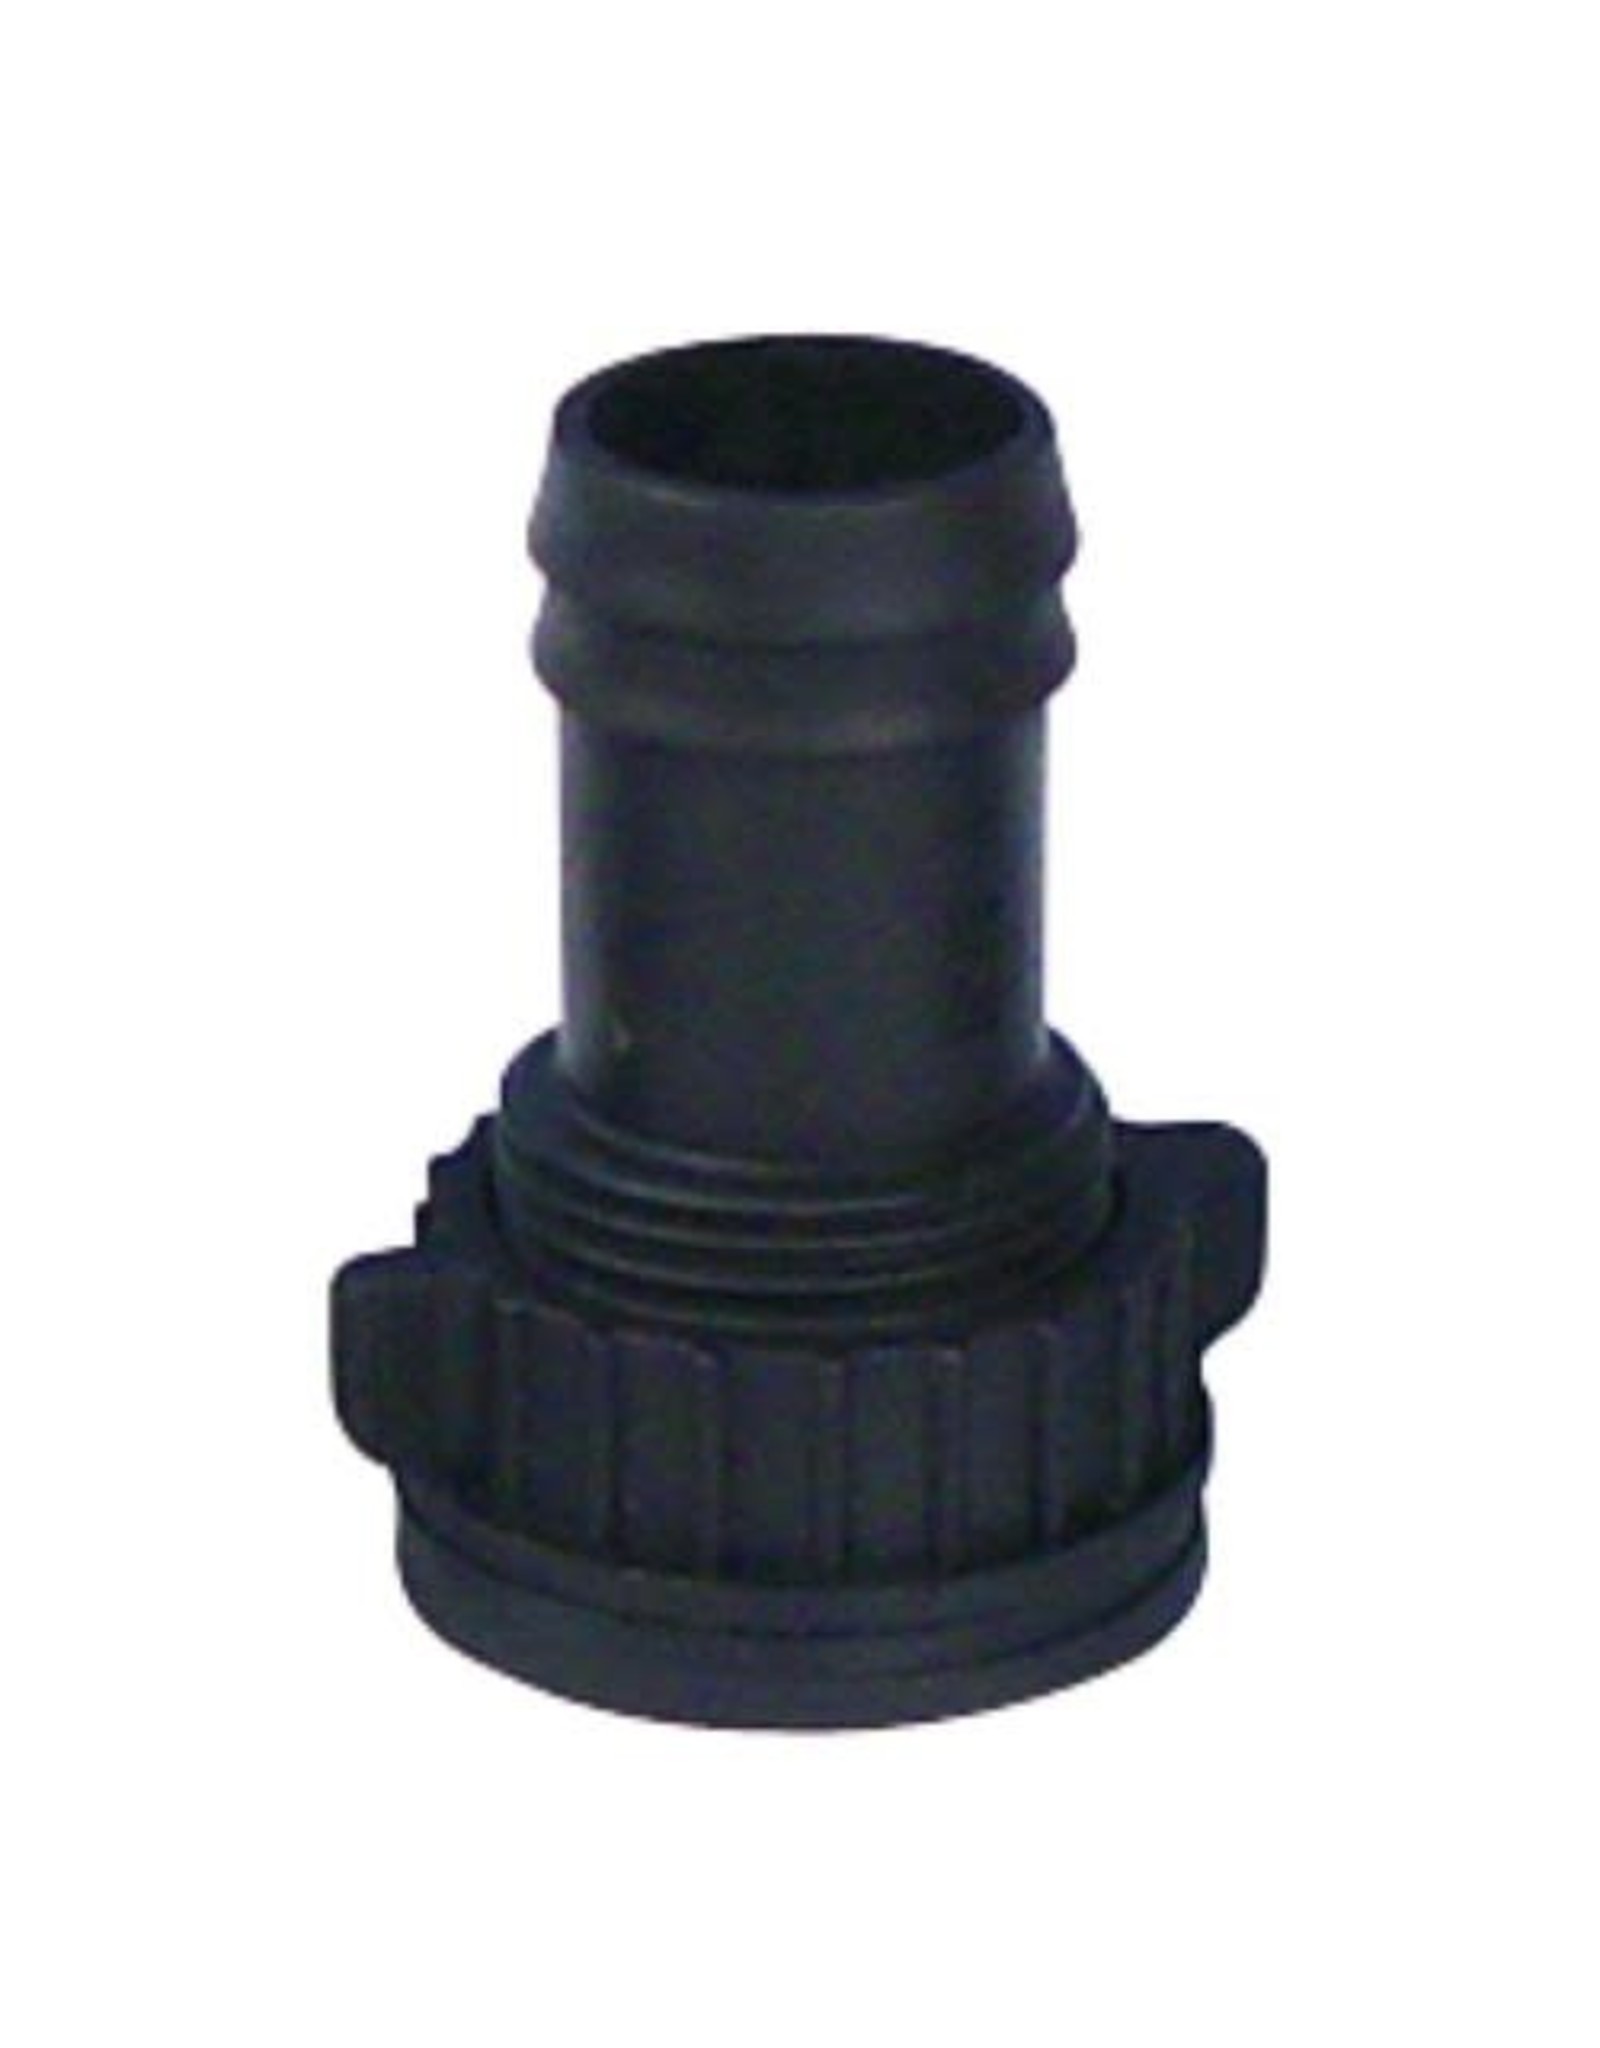 Hydro Flow Hydro Flow Ebb & Flow Tub Outlet Fitting 1 in (25mm)